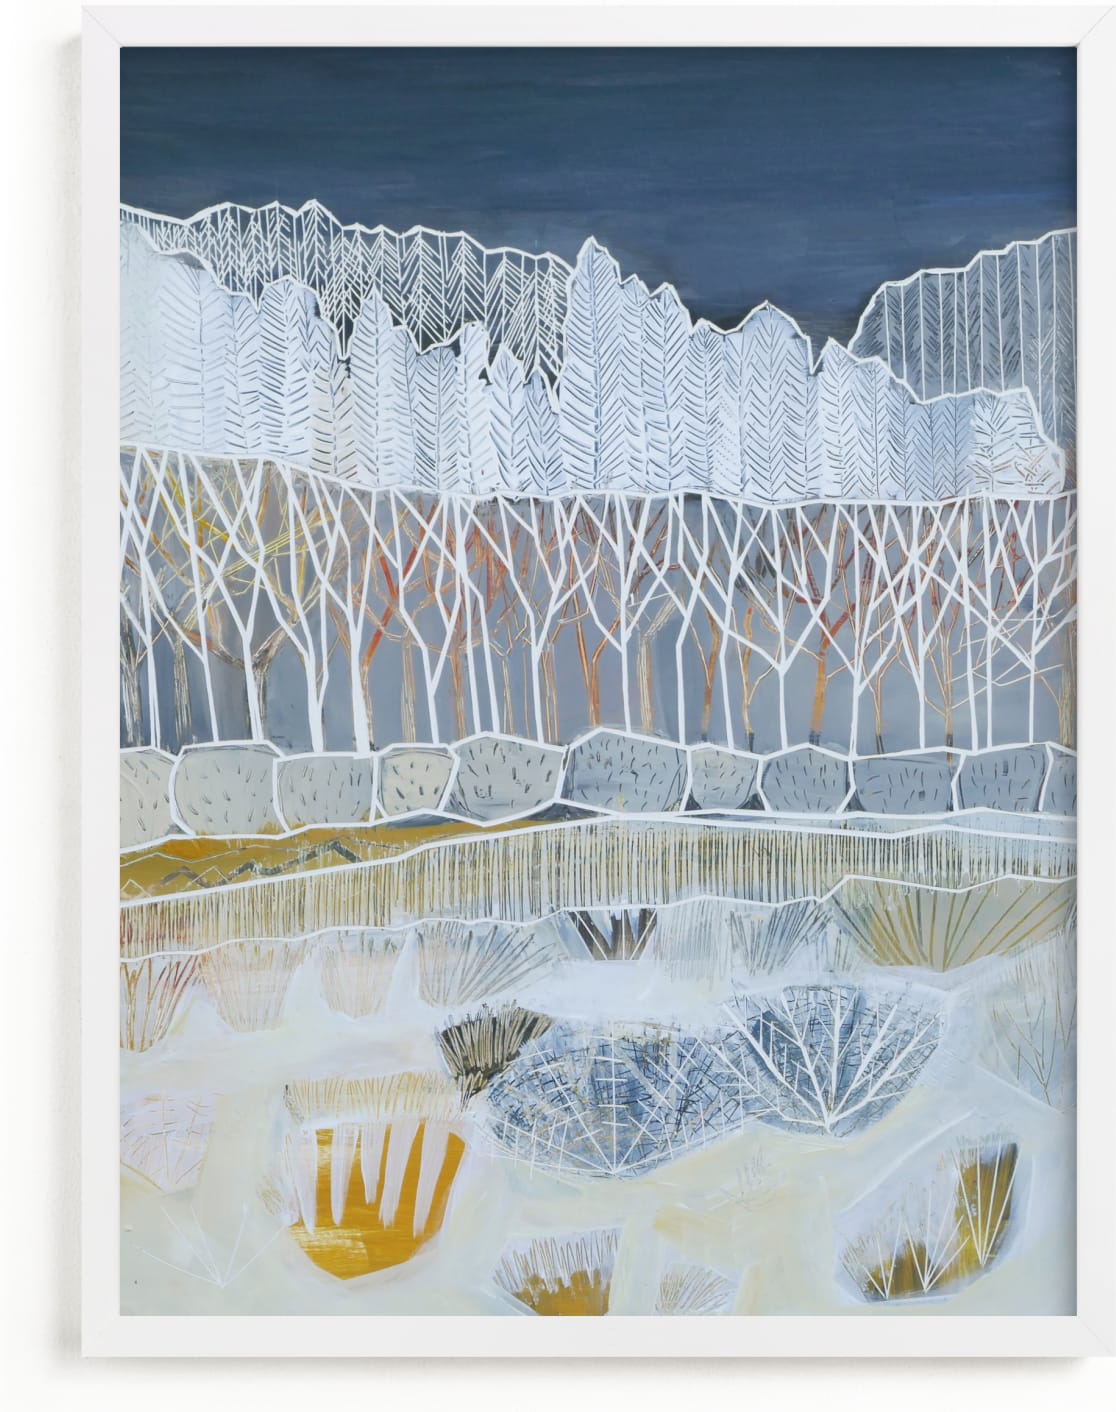 This is a blue kids wall art by Sarah Fitzgerald called White Woods.